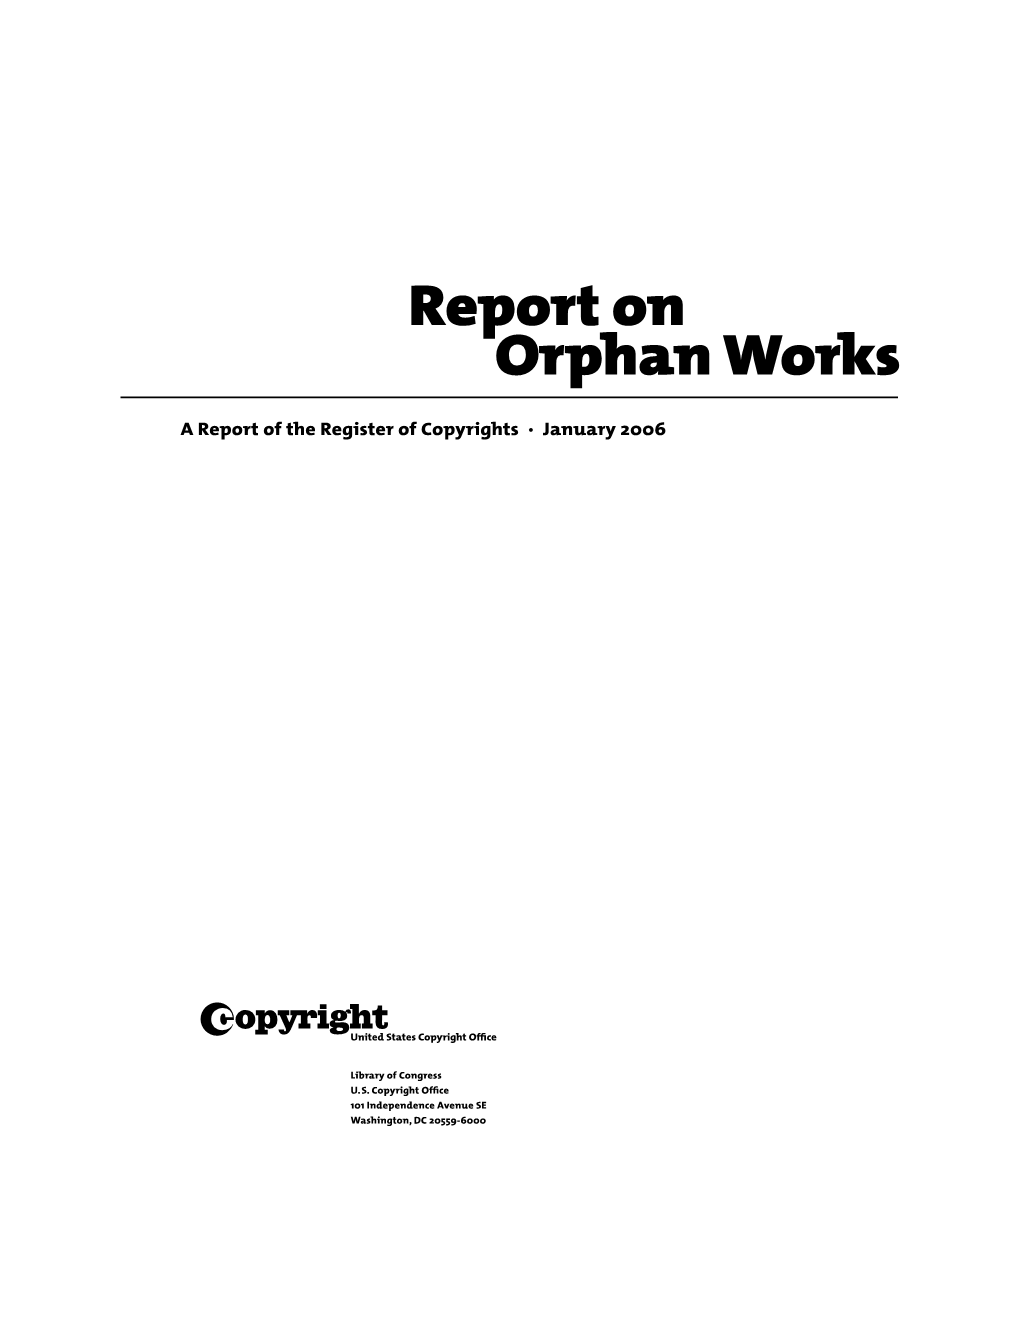 Report on Orphan Works